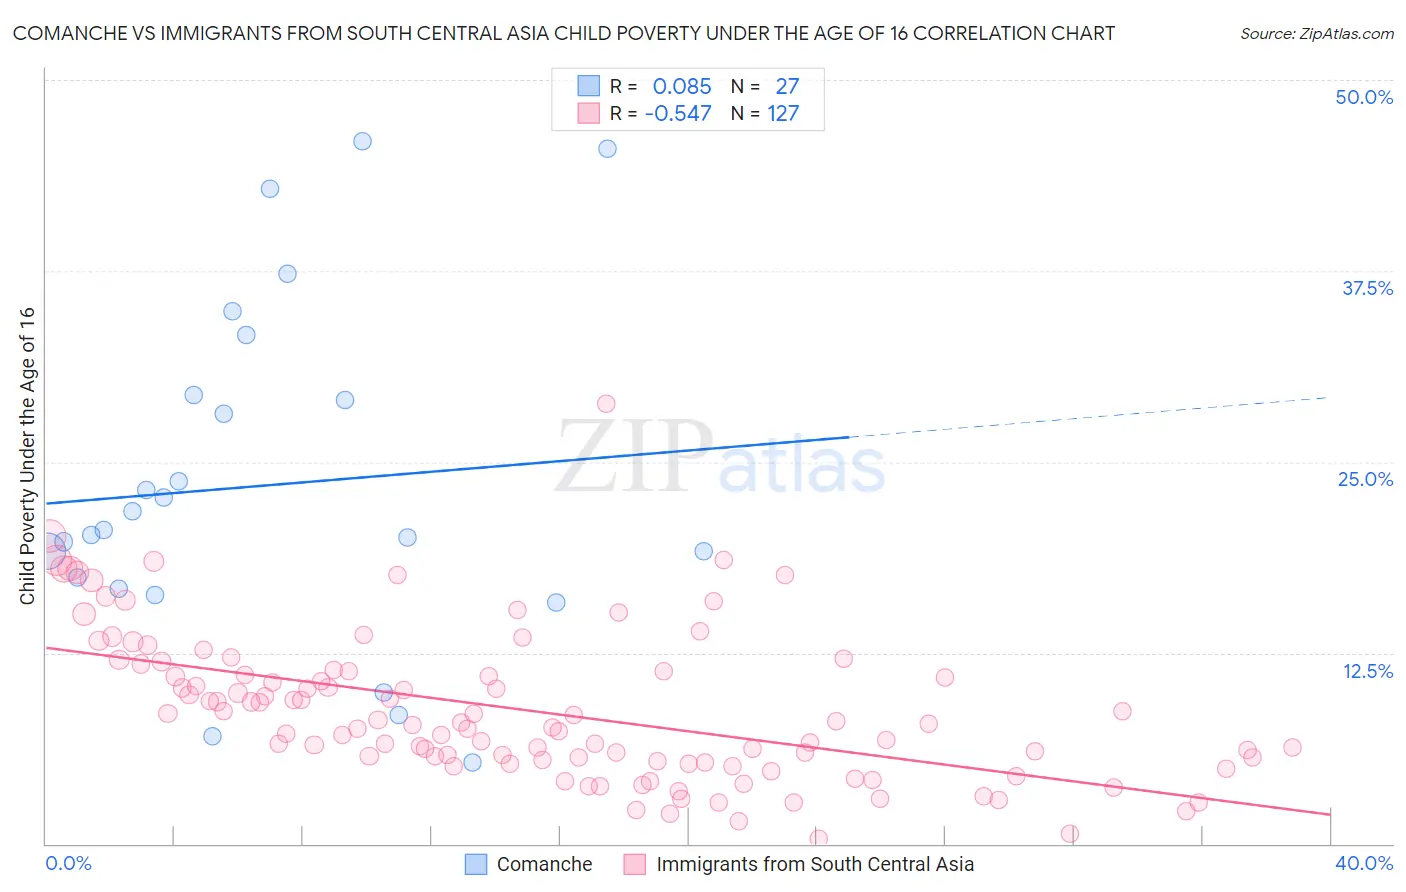 Comanche vs Immigrants from South Central Asia Child Poverty Under the Age of 16